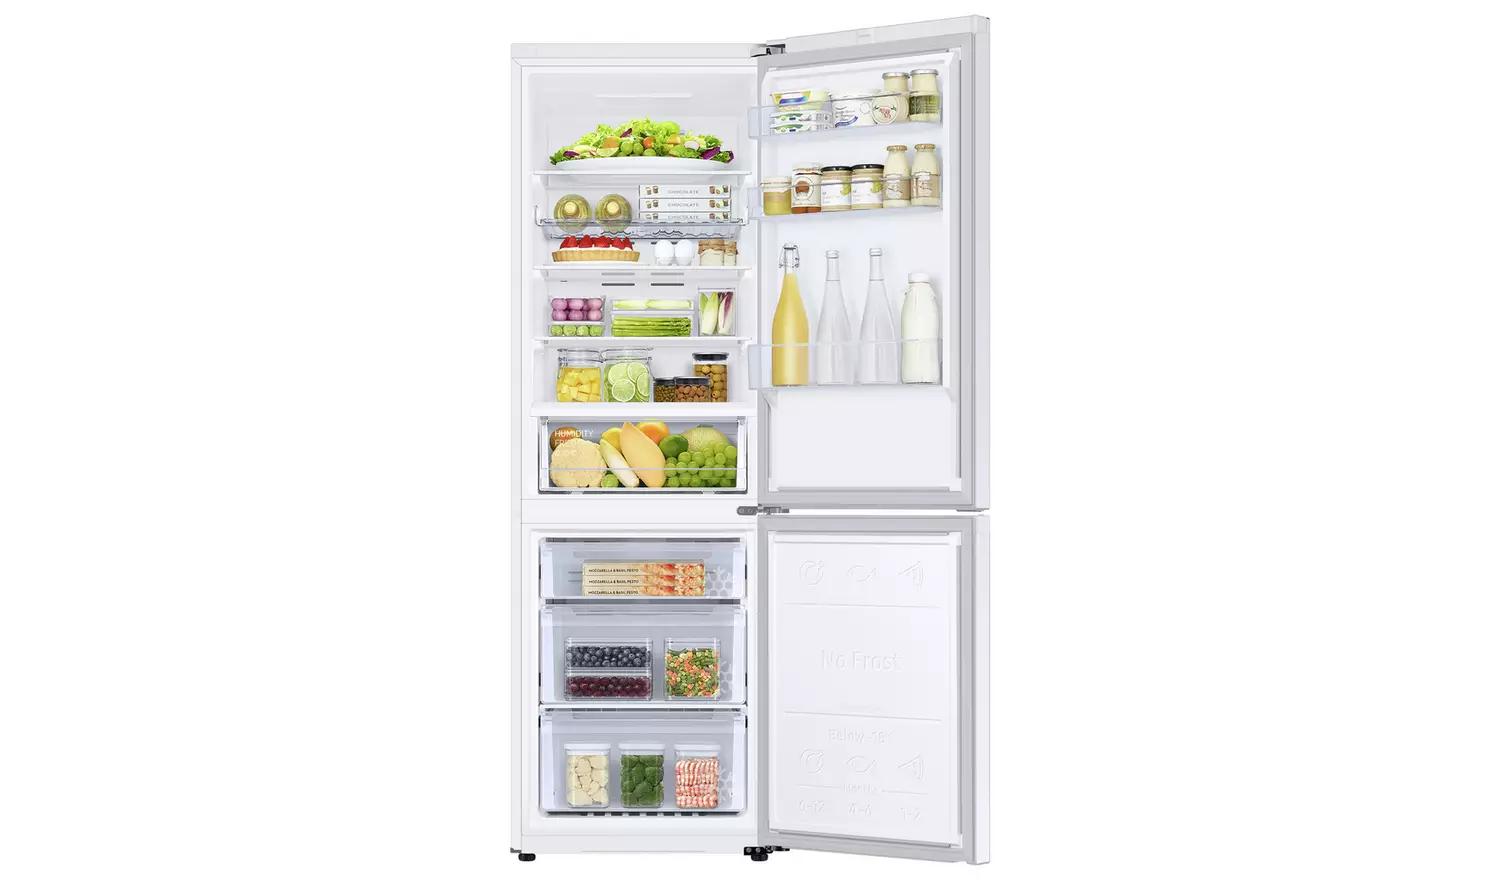 Samsung RB34T602EWW Freestanding Total No Frost Fridge Freezer 340L capacity, 60cm wide, White Height 185, Width 60